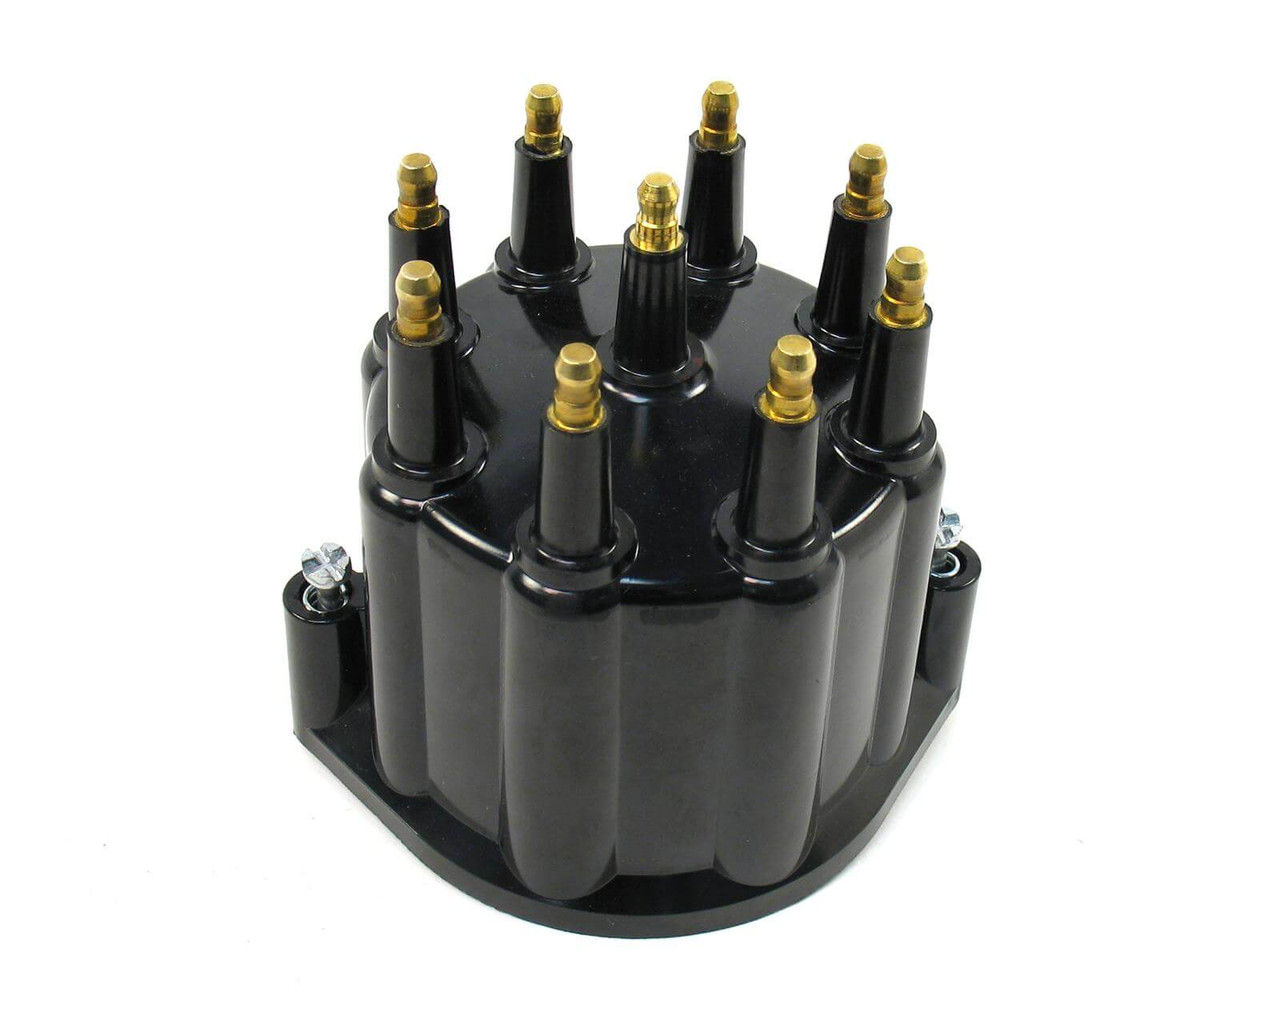 566-100 Holley EFI Dual Sync Distributor Service Cap and Rotor (Gen 1)